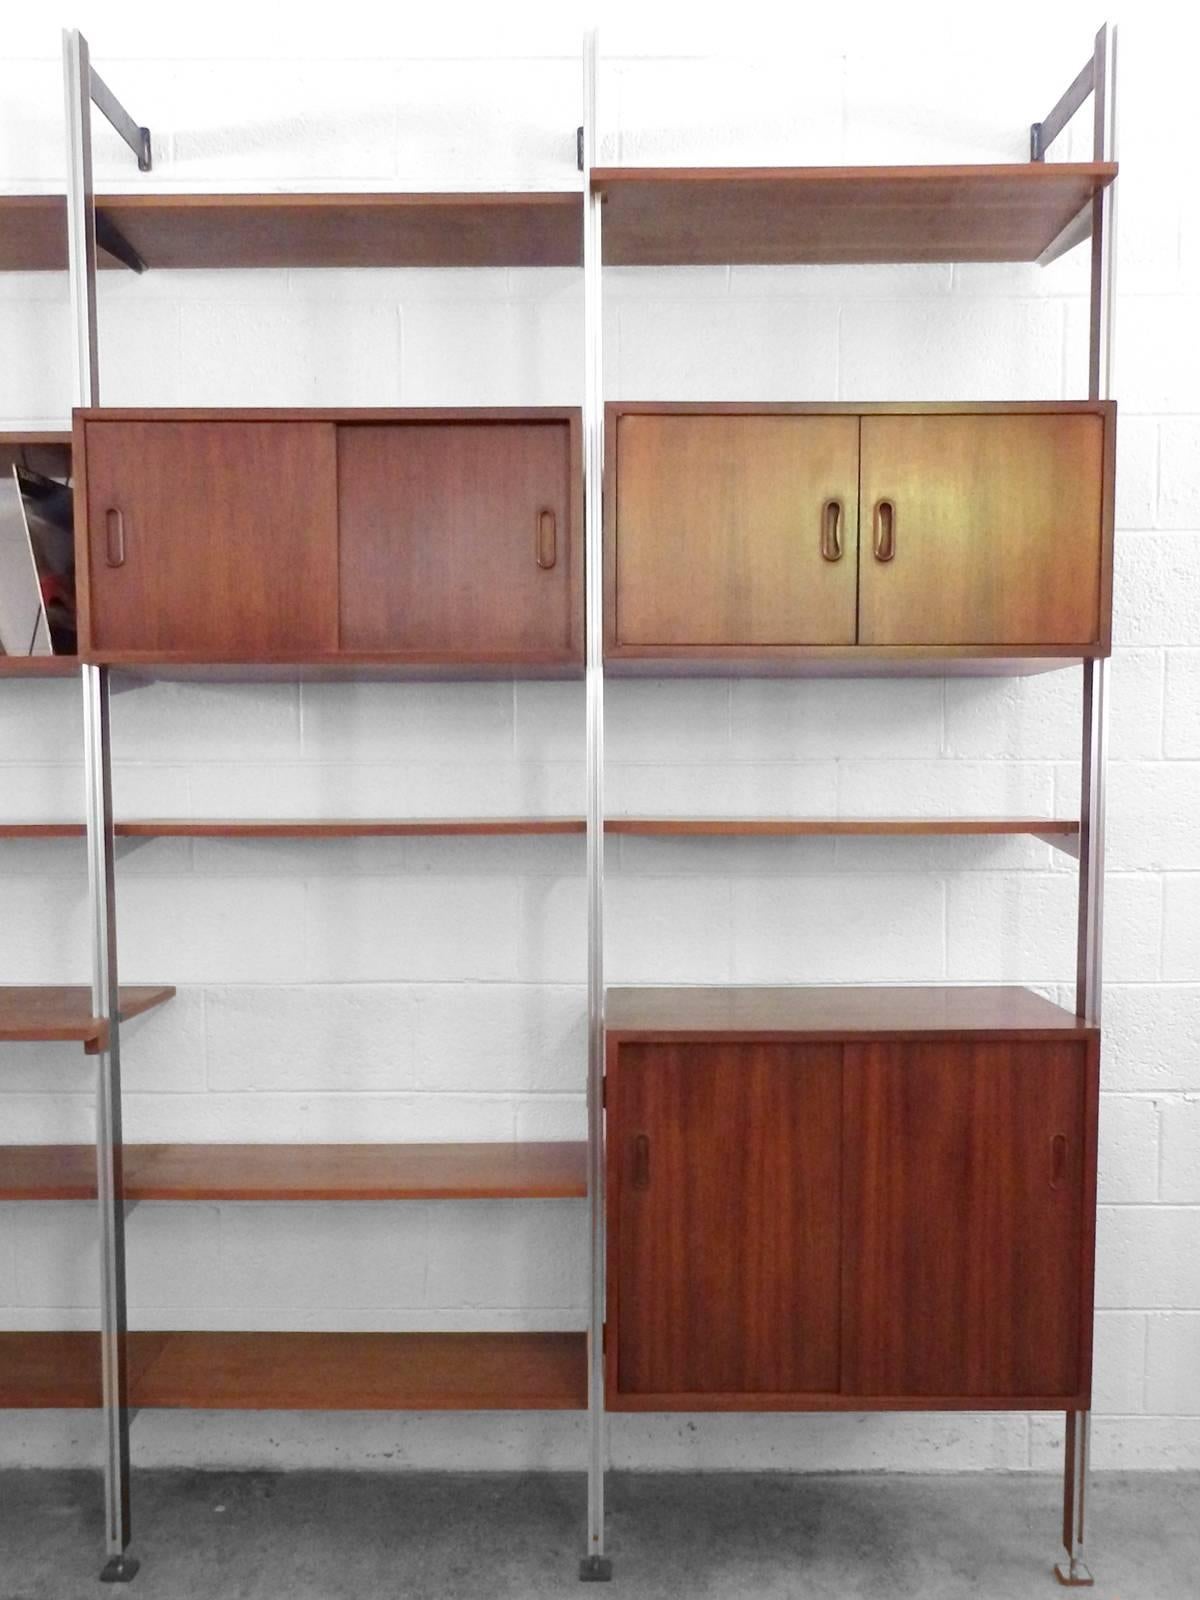 George Nelson for Omni
Cabinets: 18 deep, shelves: 12 deep.
Overall 129.5 wide - 98 tall - 18 deep.